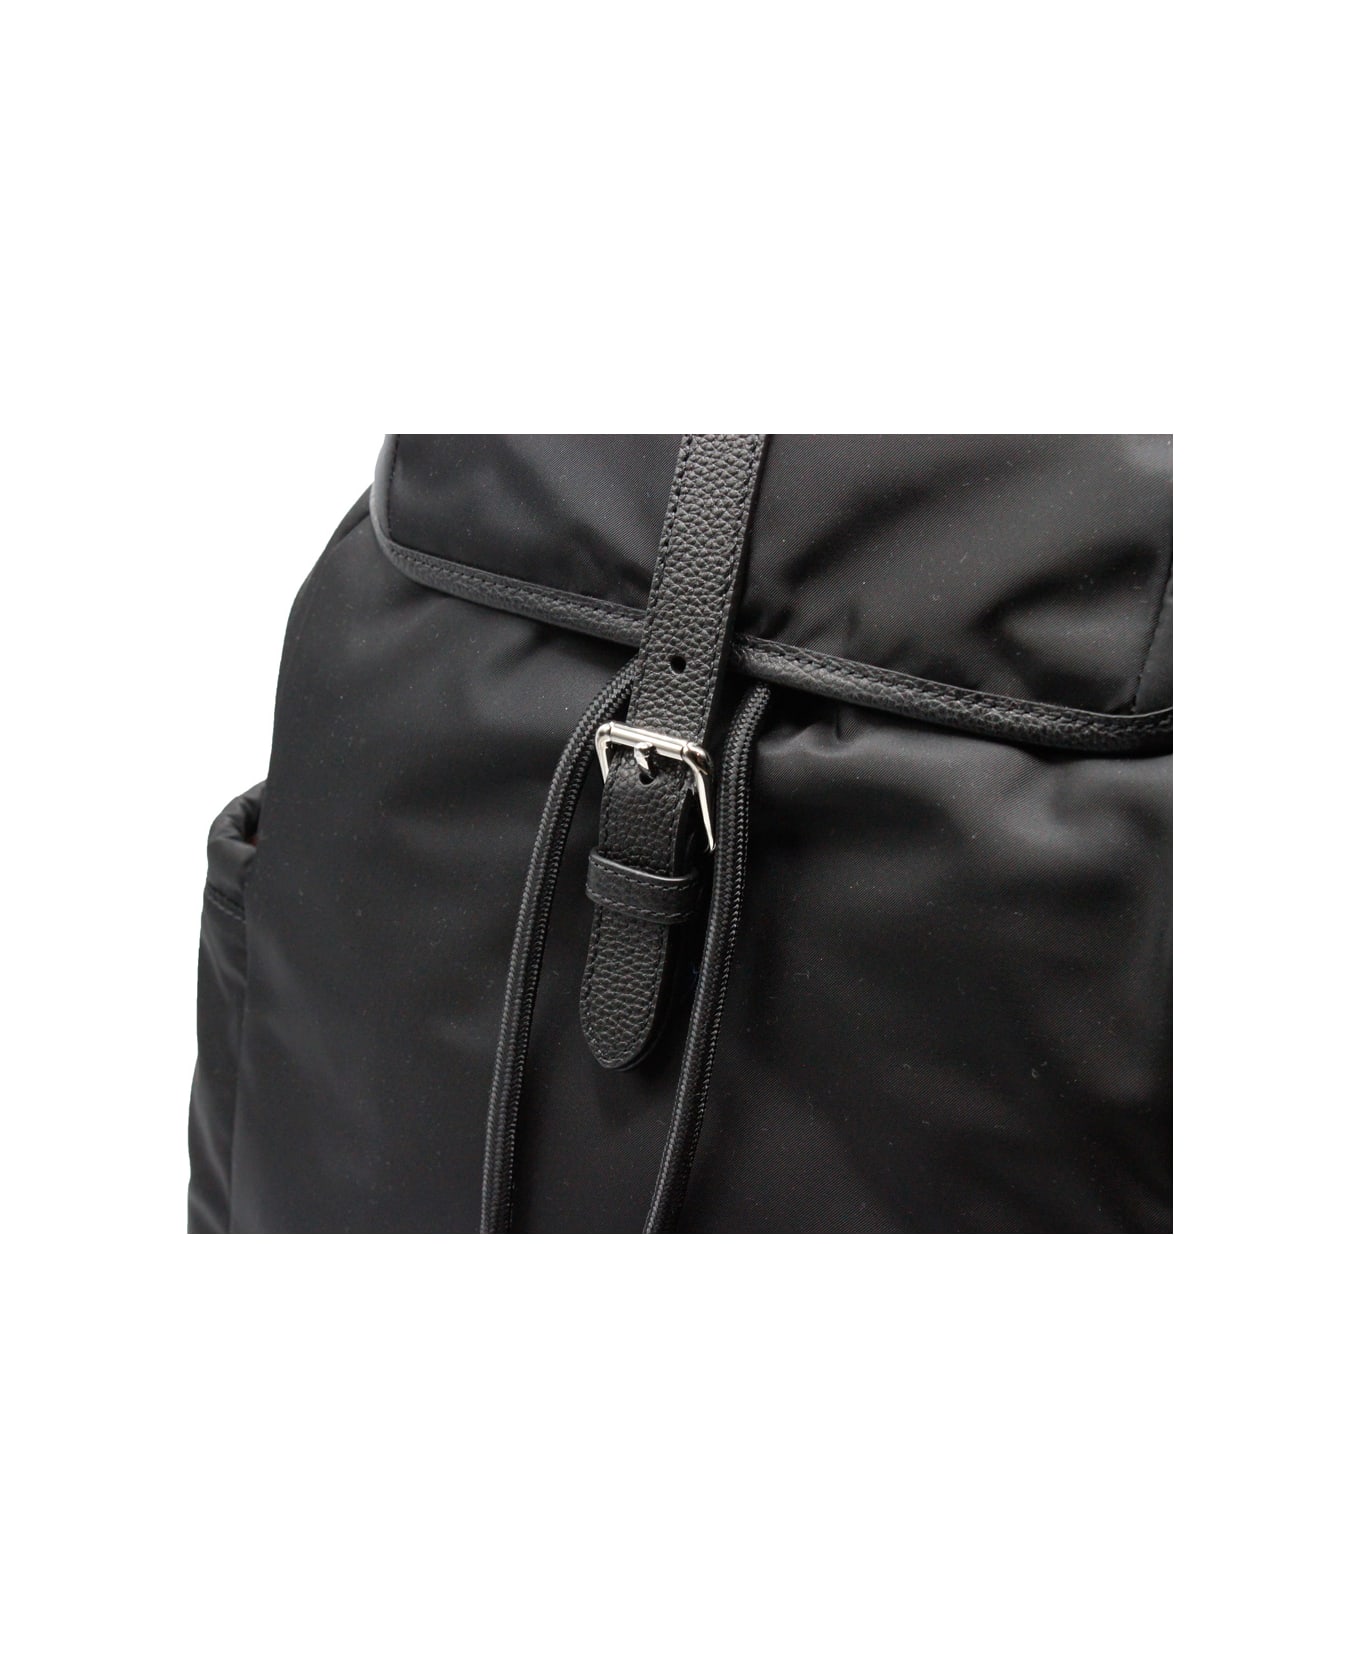 Burberry Recycled Nylon Backpack With Adjustable Shoulder Straps, Internal And External Pockets - Black